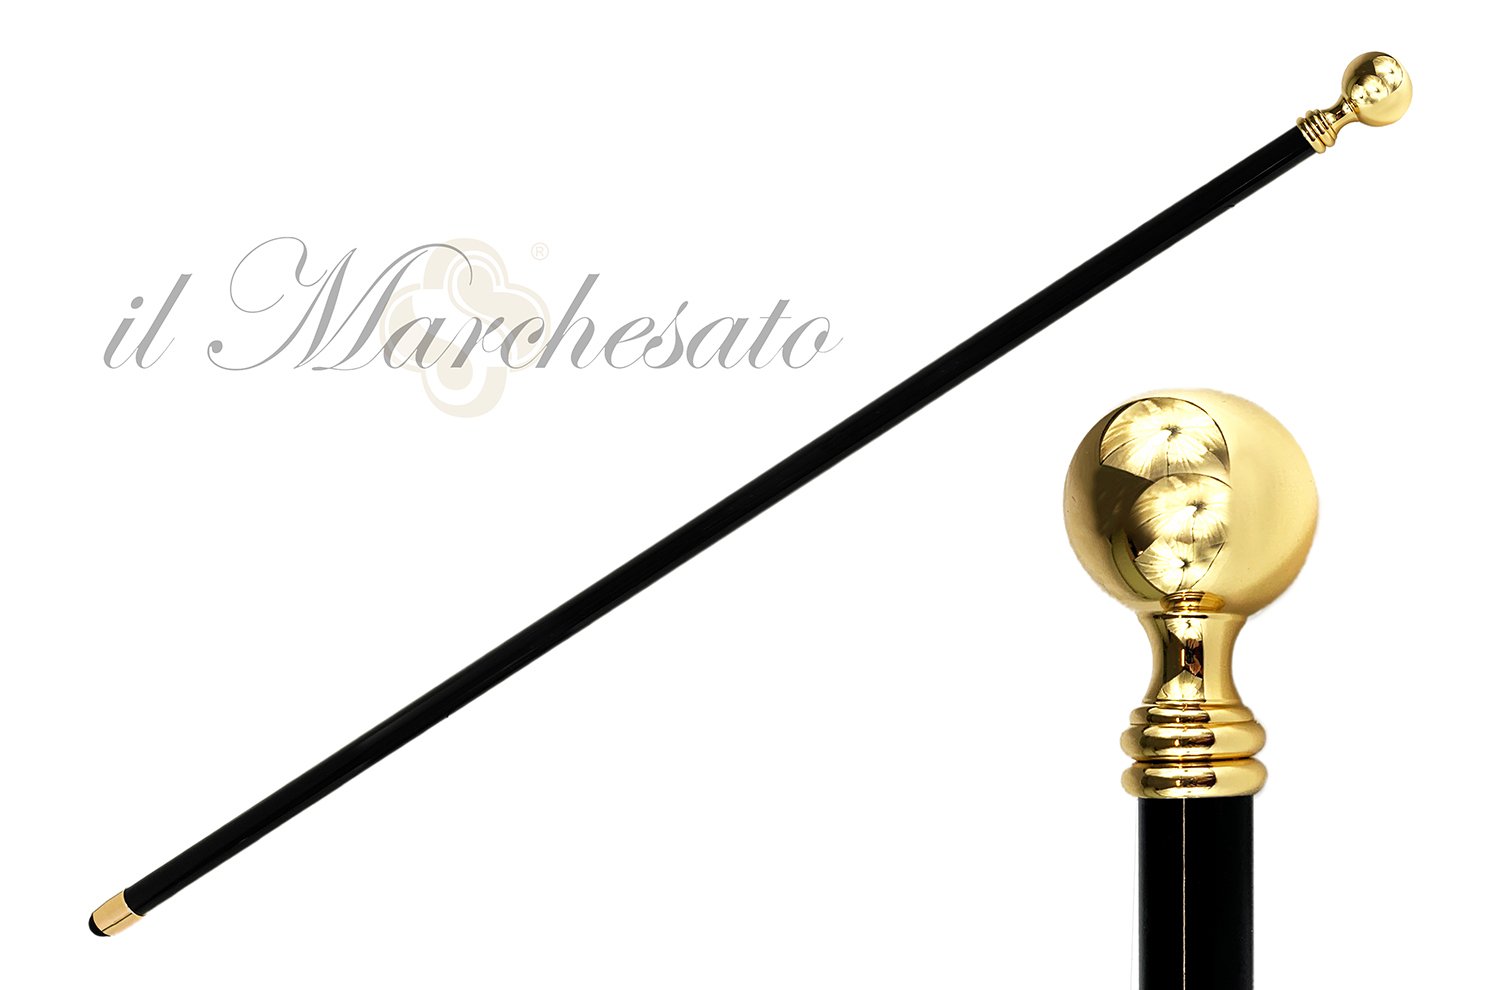 Gold Plated Round Ball Knob Style Cast Brass - IL MARCHESATO LUXURY UMBRELLAS, CANES AND SHOEHORNS